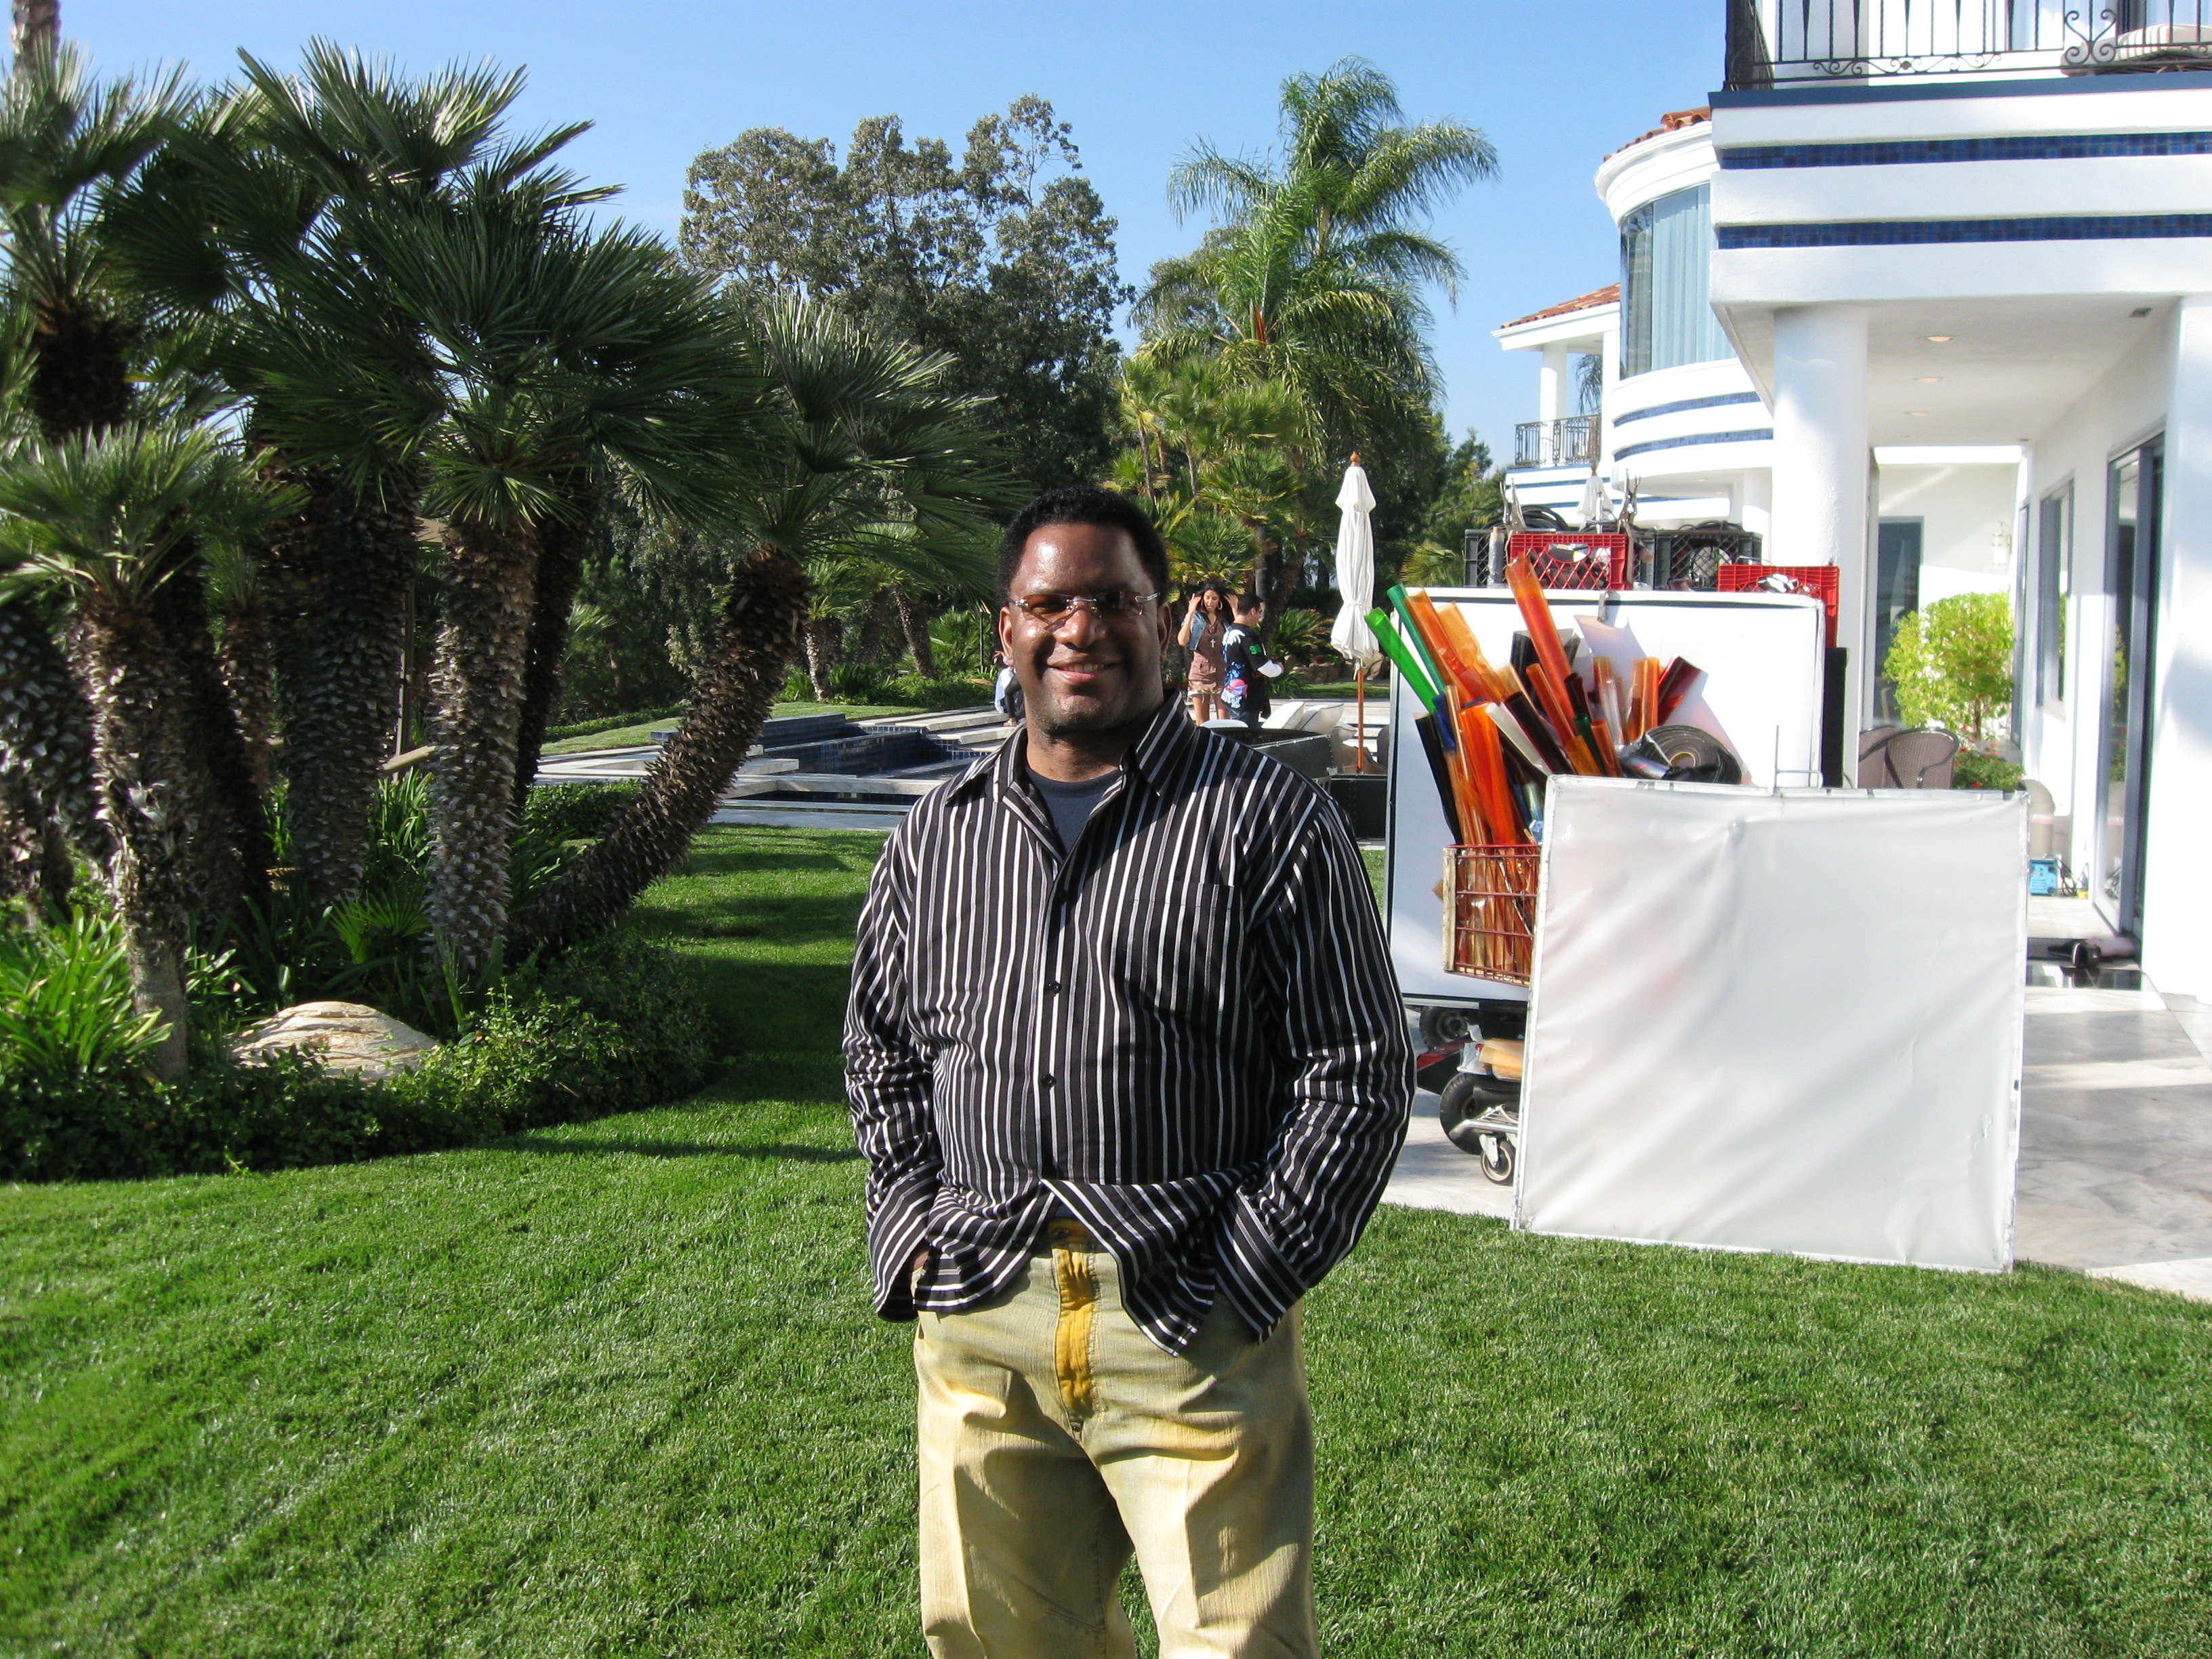 Producer Kirby Britten on location during a production shoot.